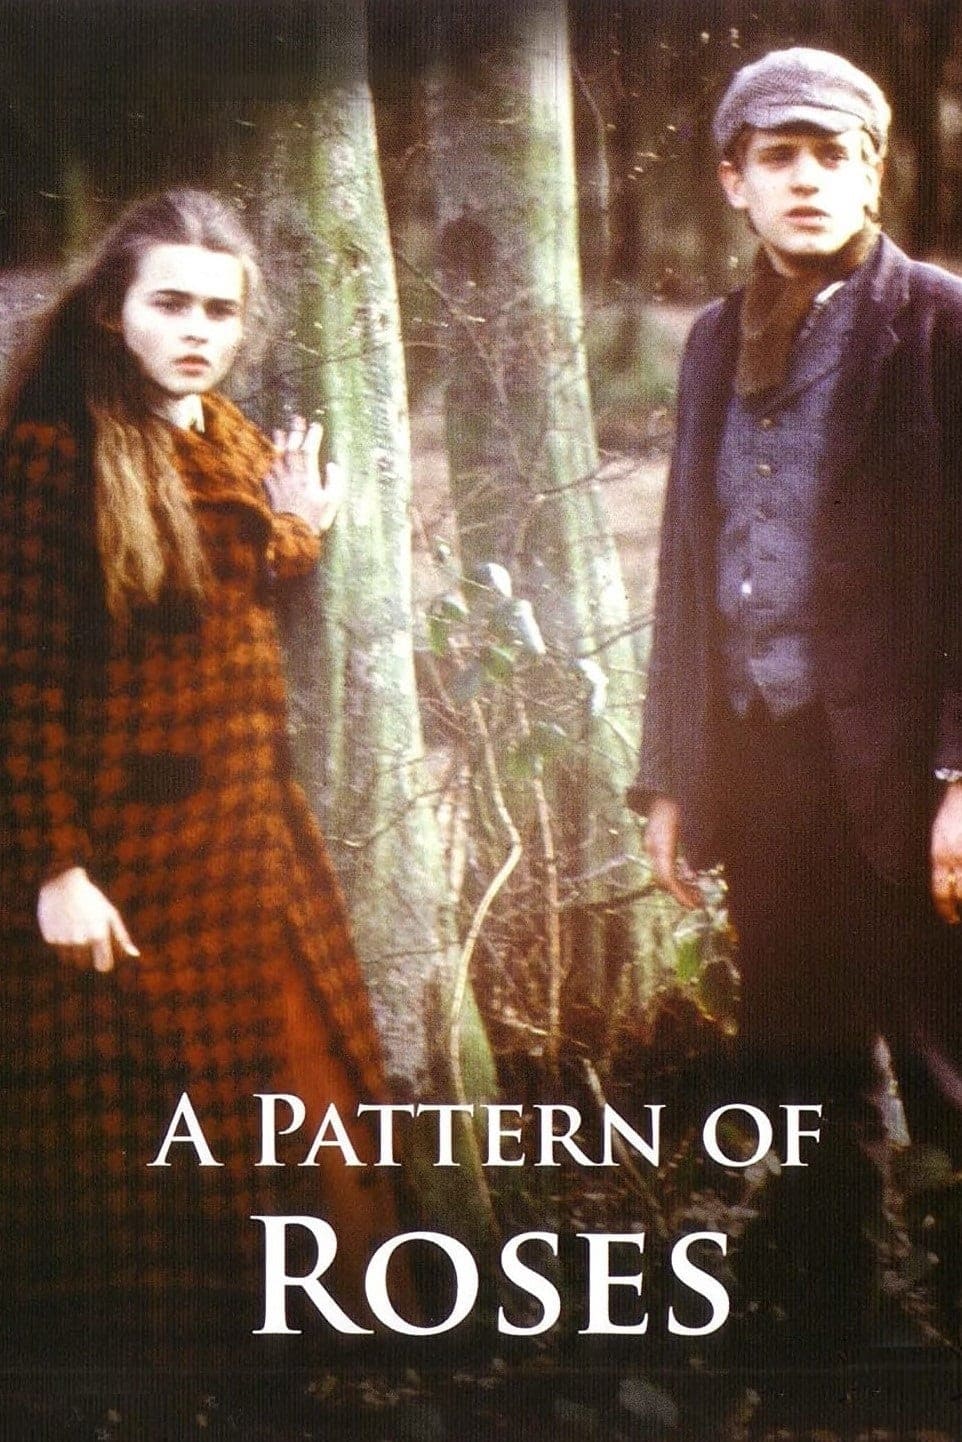 A Pattern of Roses (1983)